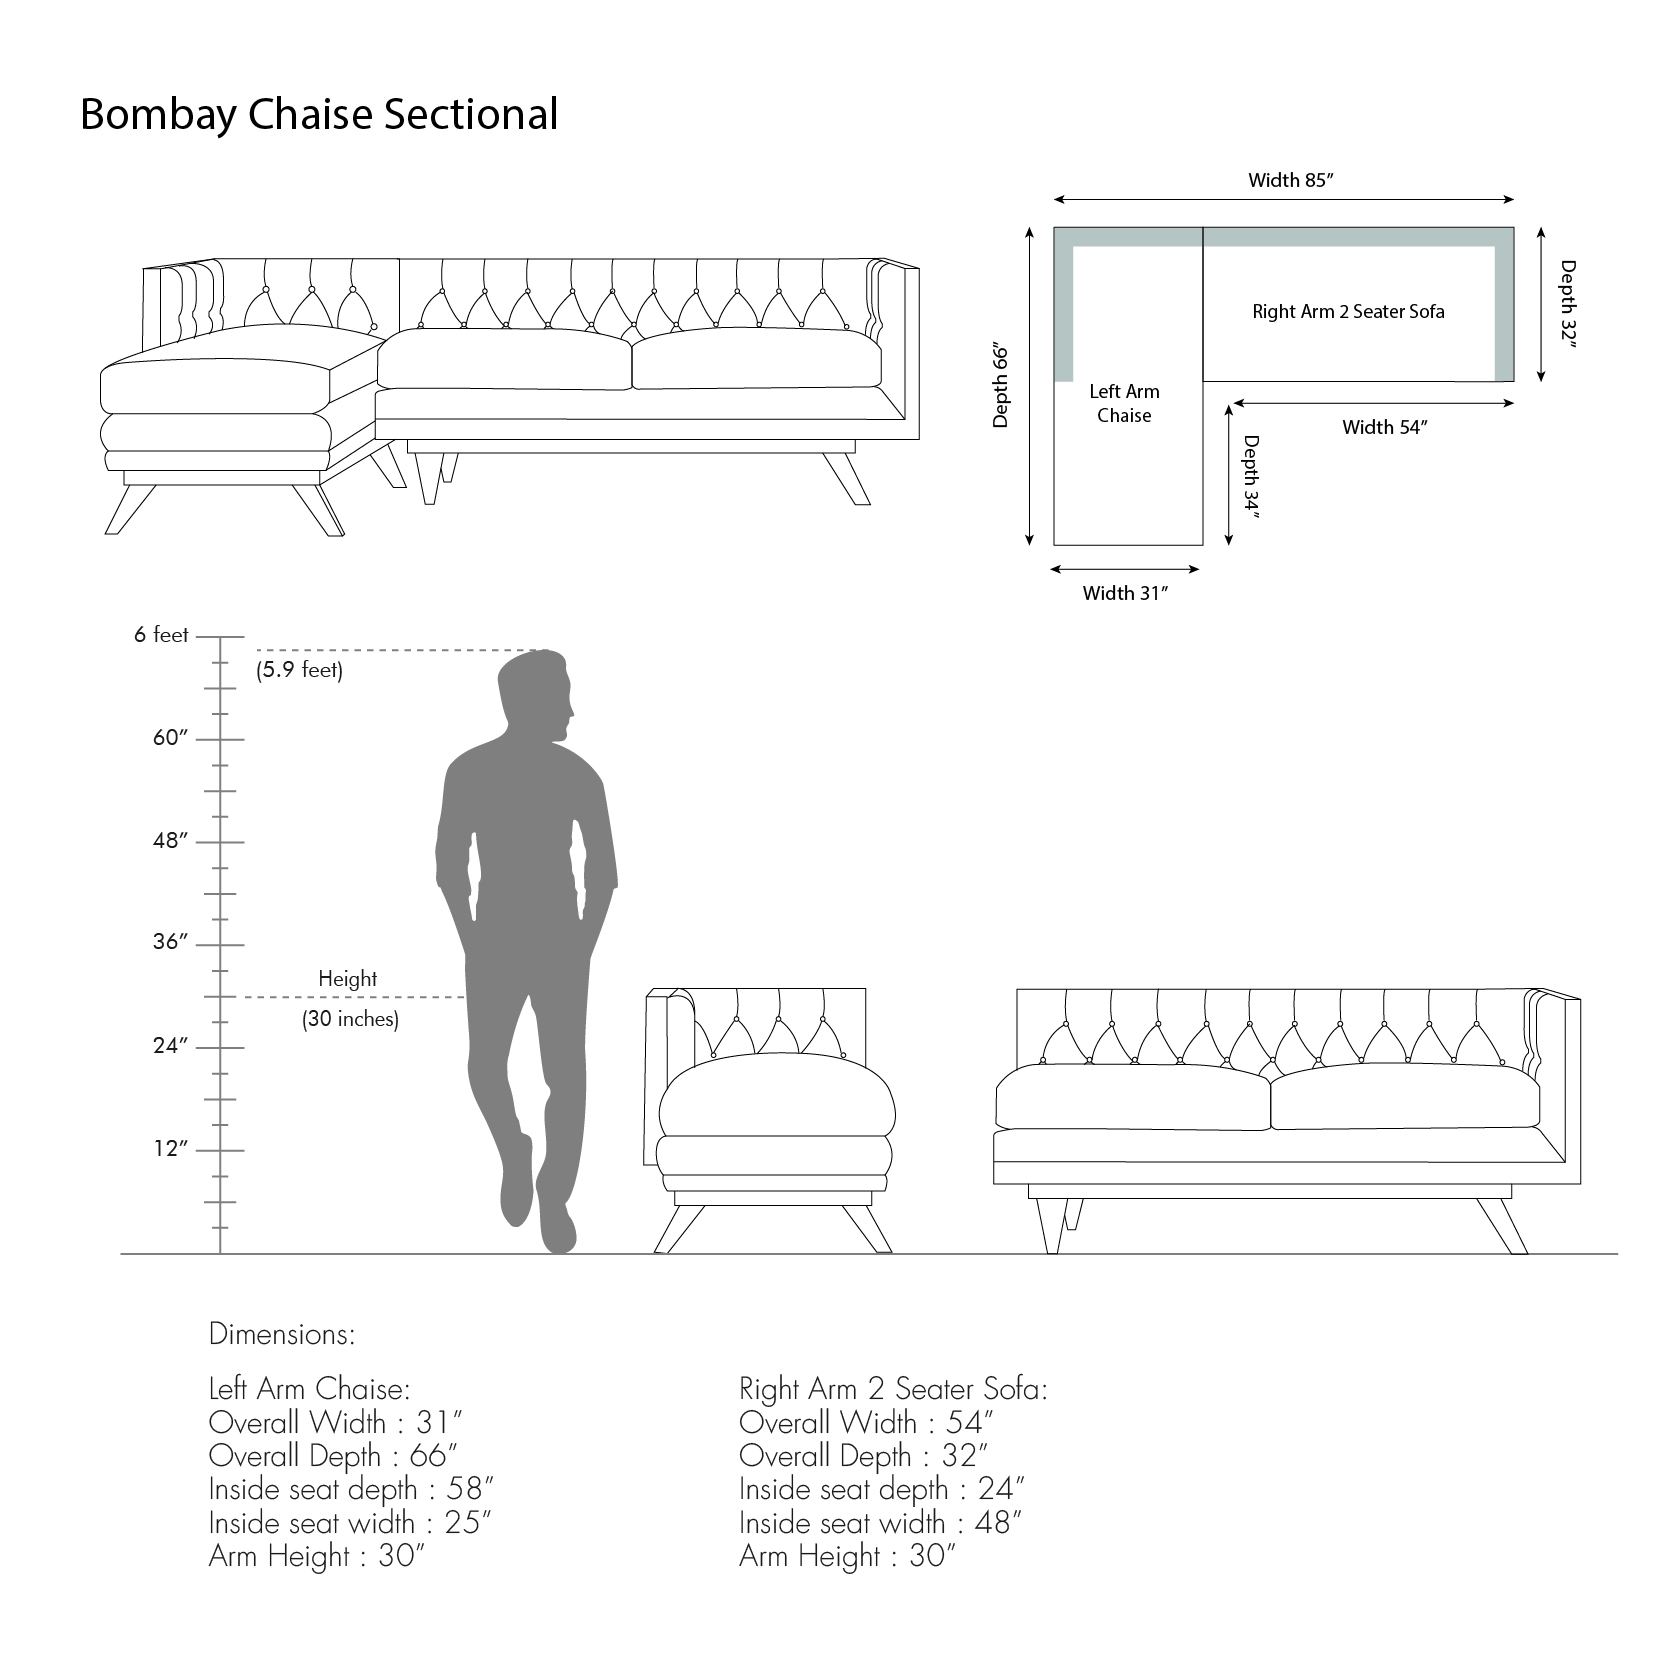 Bombay Chaise Sectional